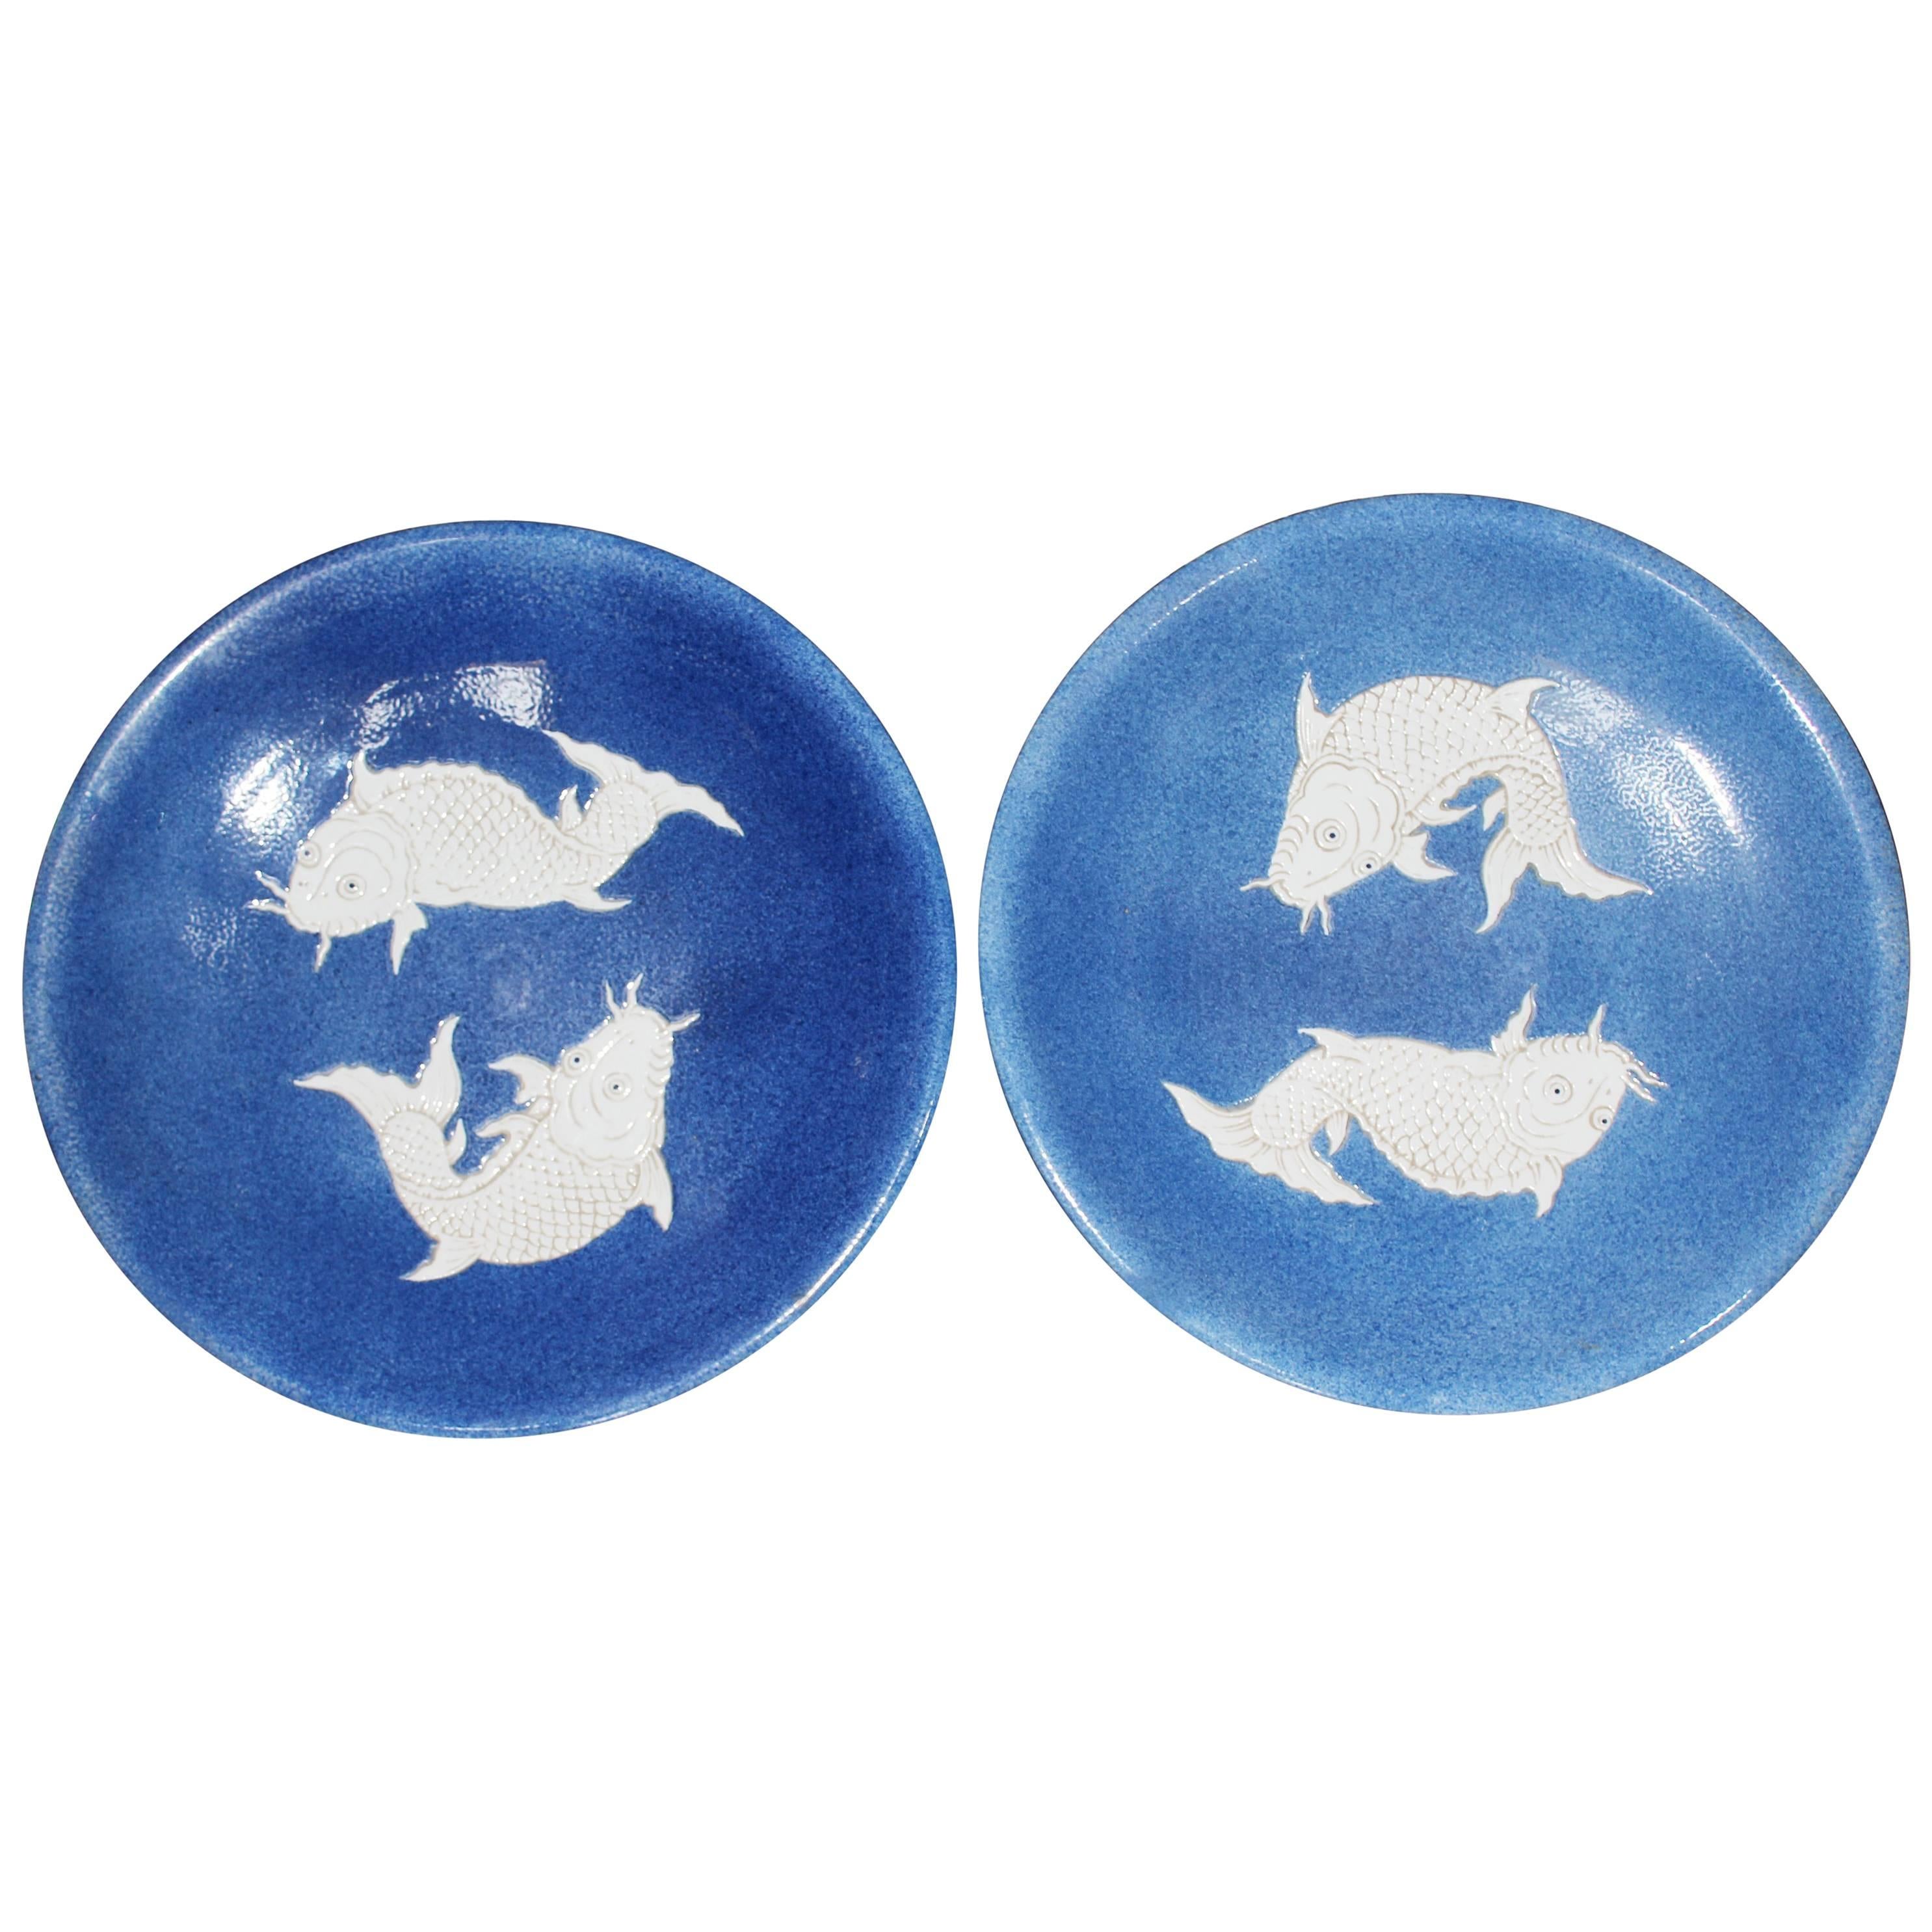 Pair of Chinese Cobalt Blue Decorated Porcelain Plates